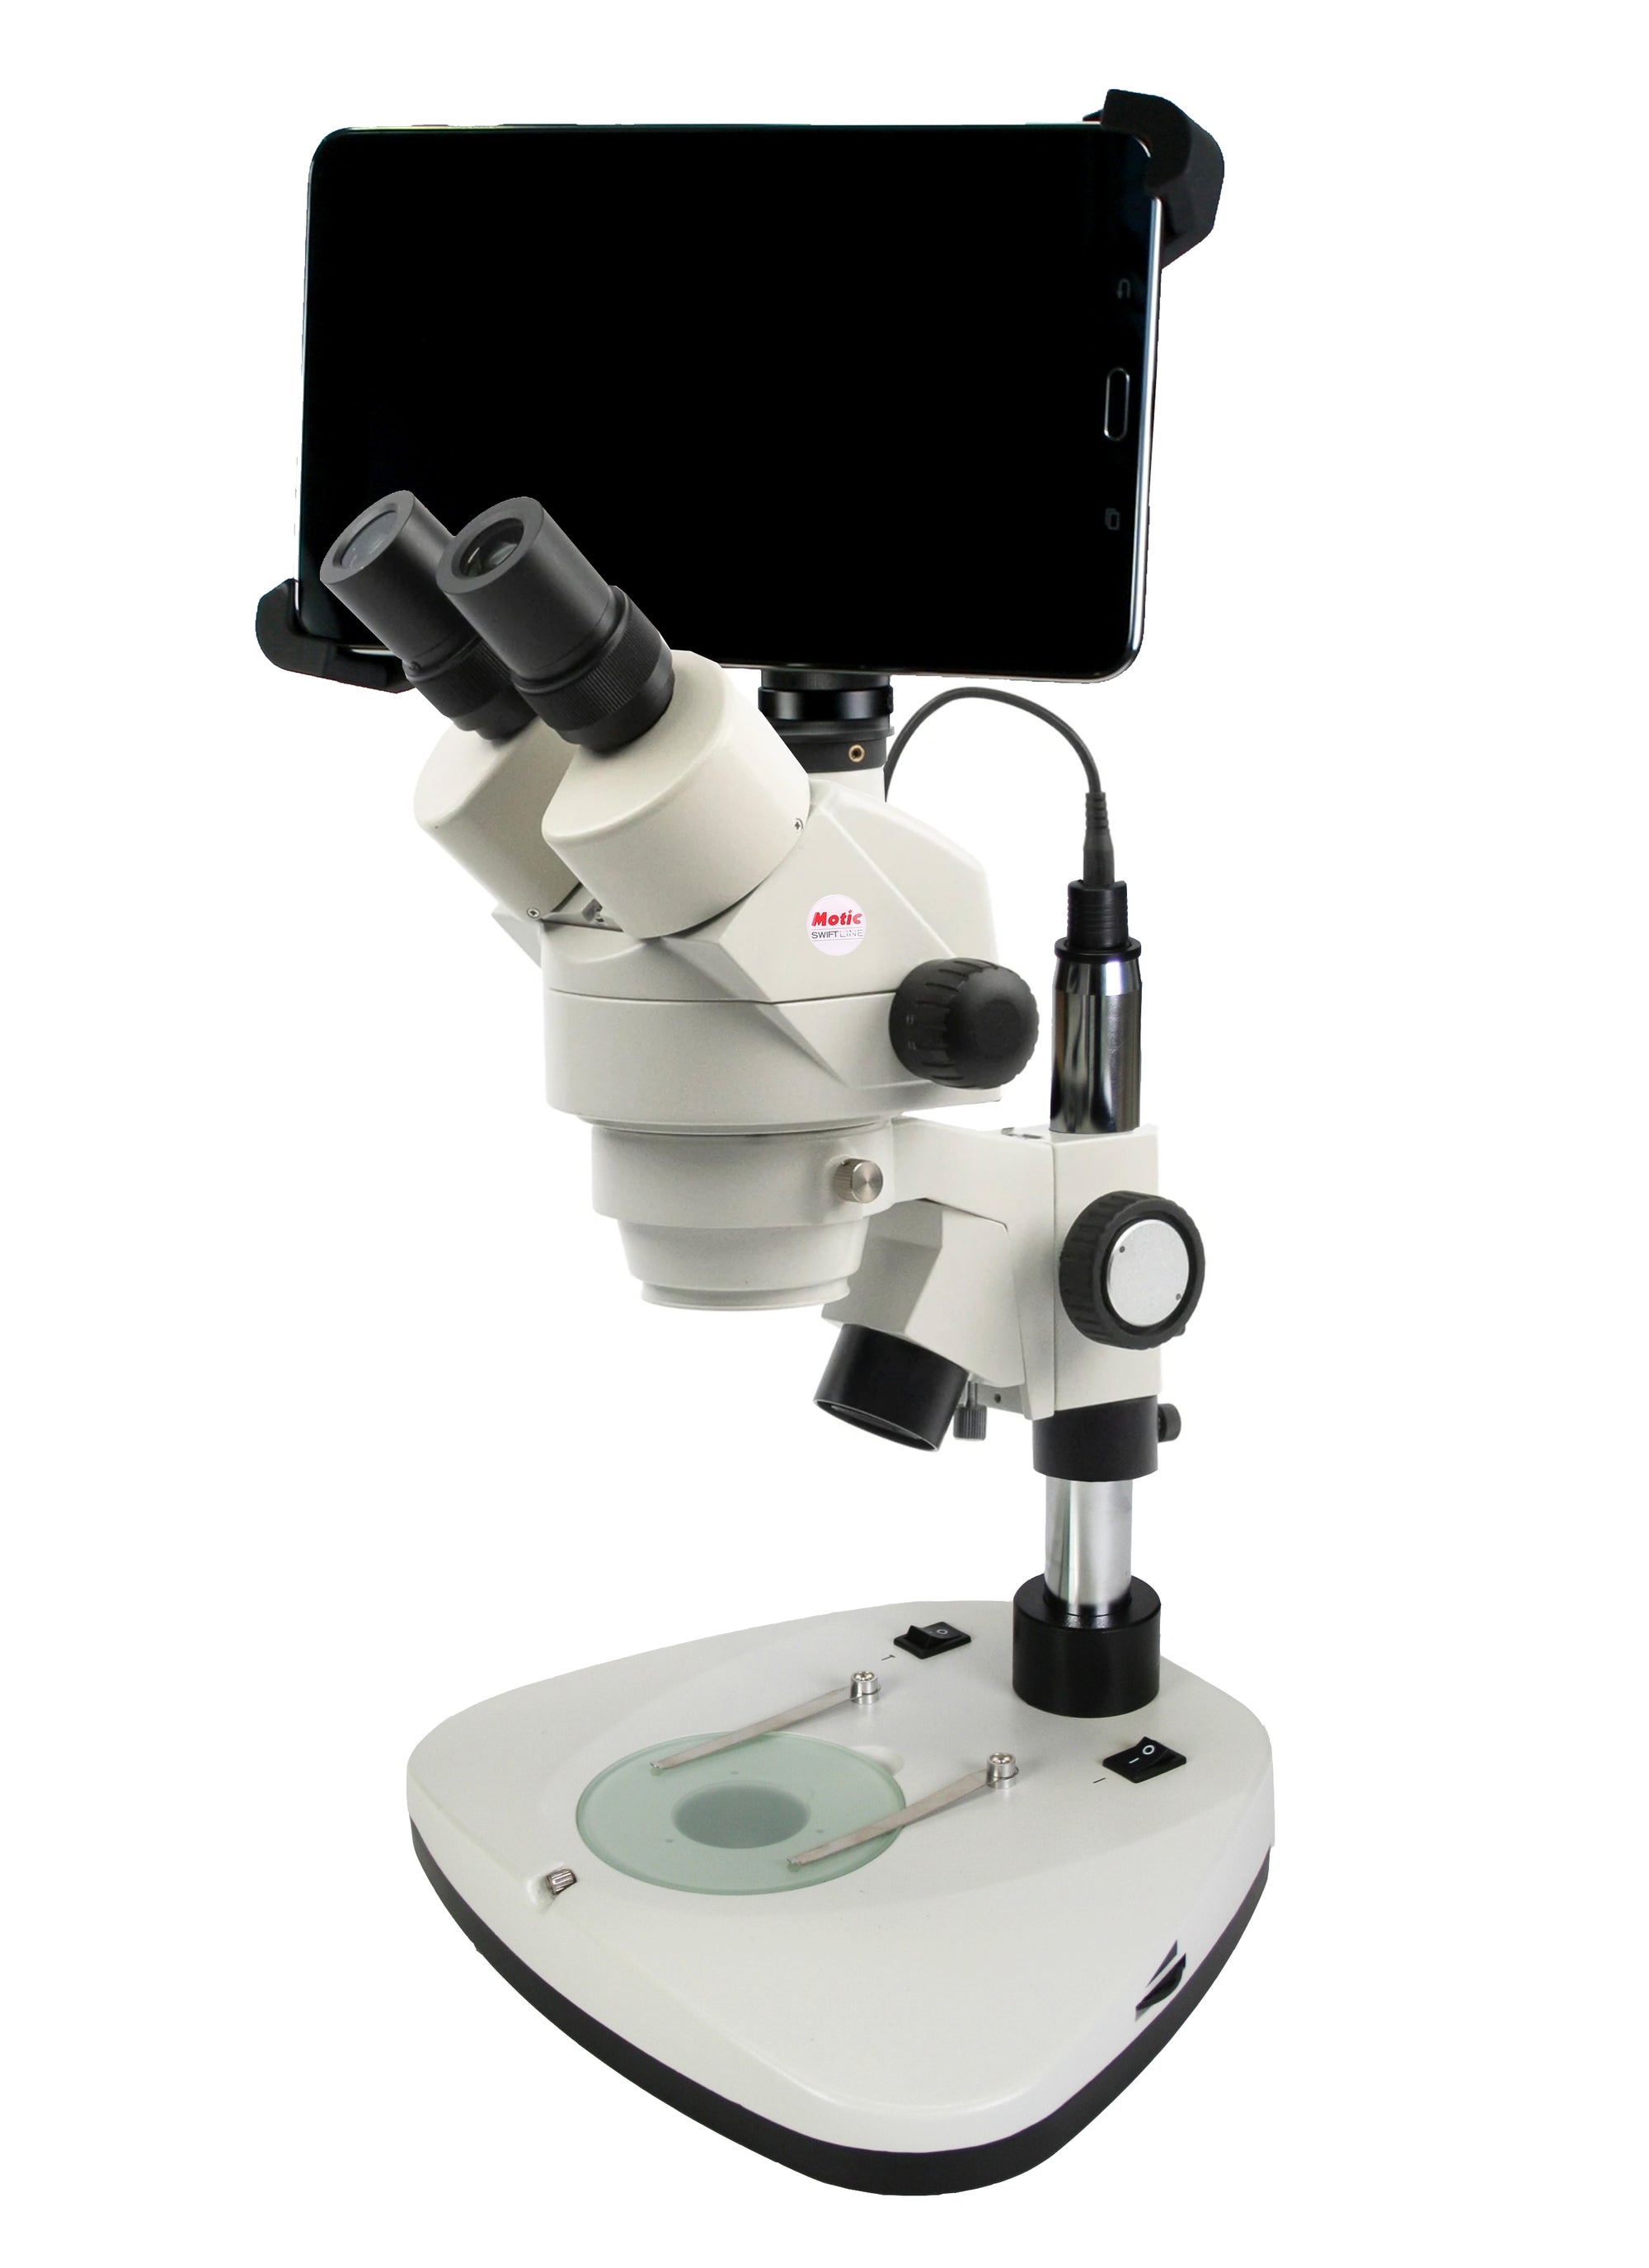 Zoom Stereo Microscope (0.75X-4.5X) with 8" Tablet - M30TZ-SM99CL-BTI1